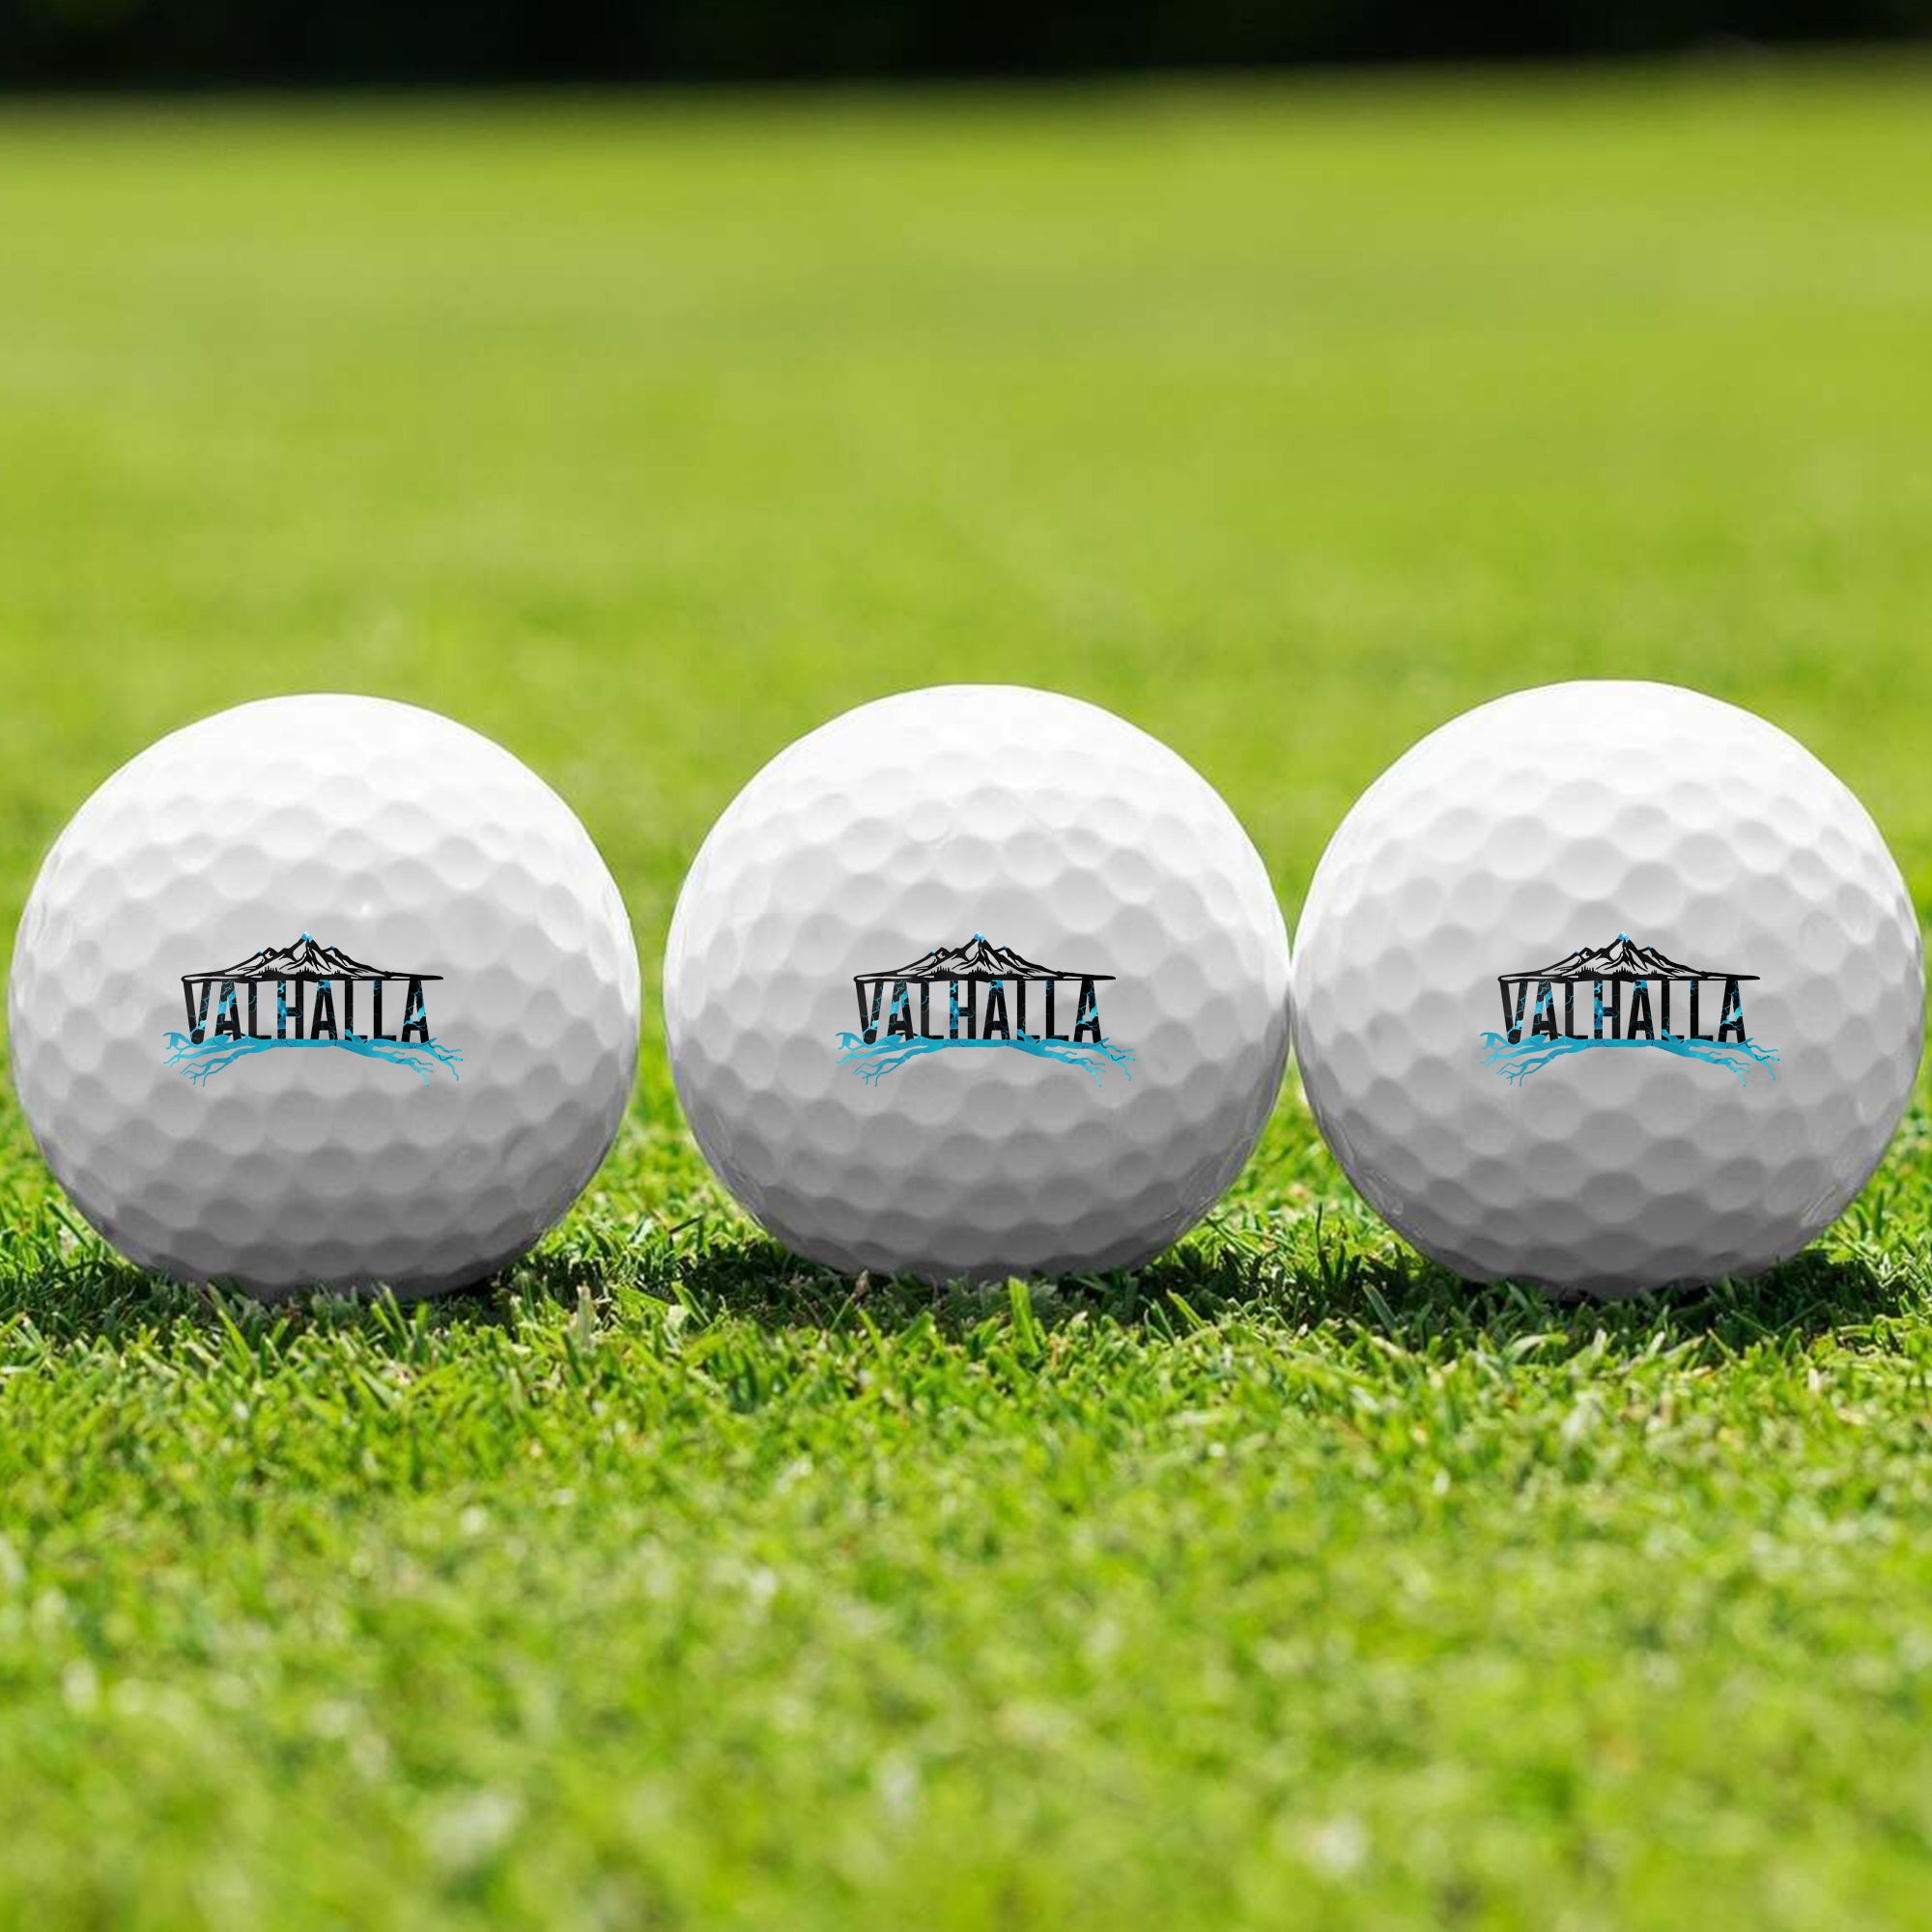 Icy Valhalla Mountain Golf Ball 3 Pack